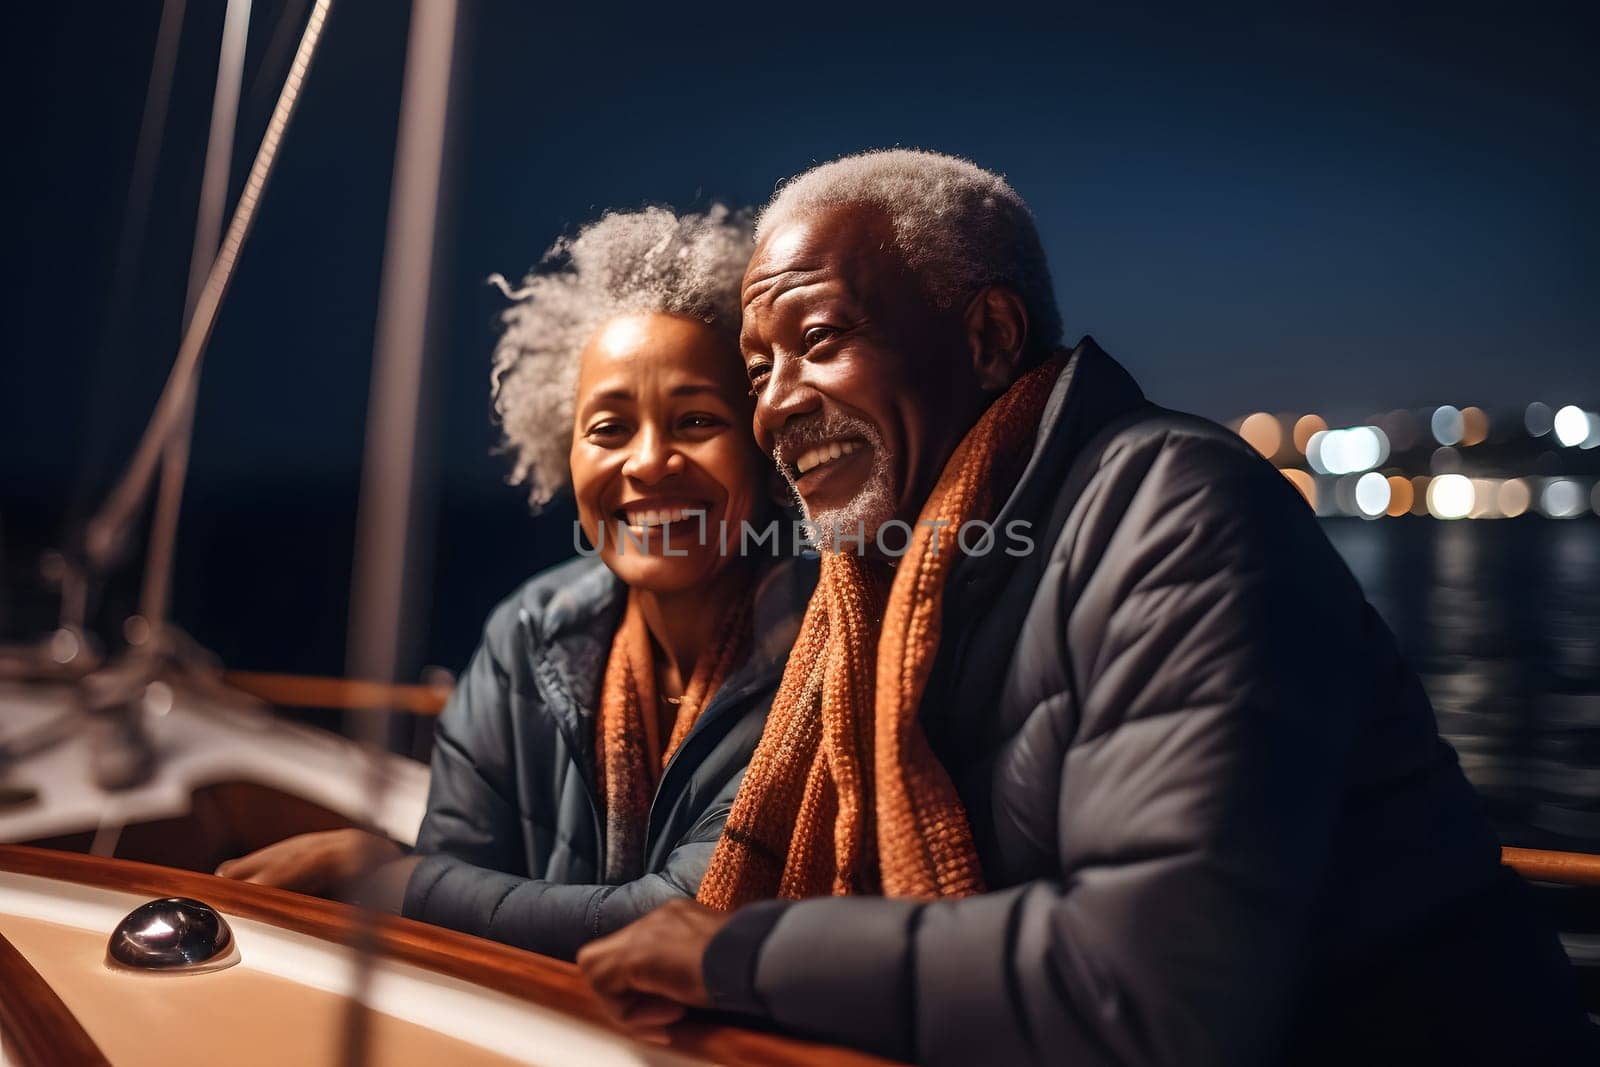 Beautiful and happy senior african american couple on a sailboat at night. Neural network generated in May 2023. Not based on any actual person, scene or pattern.